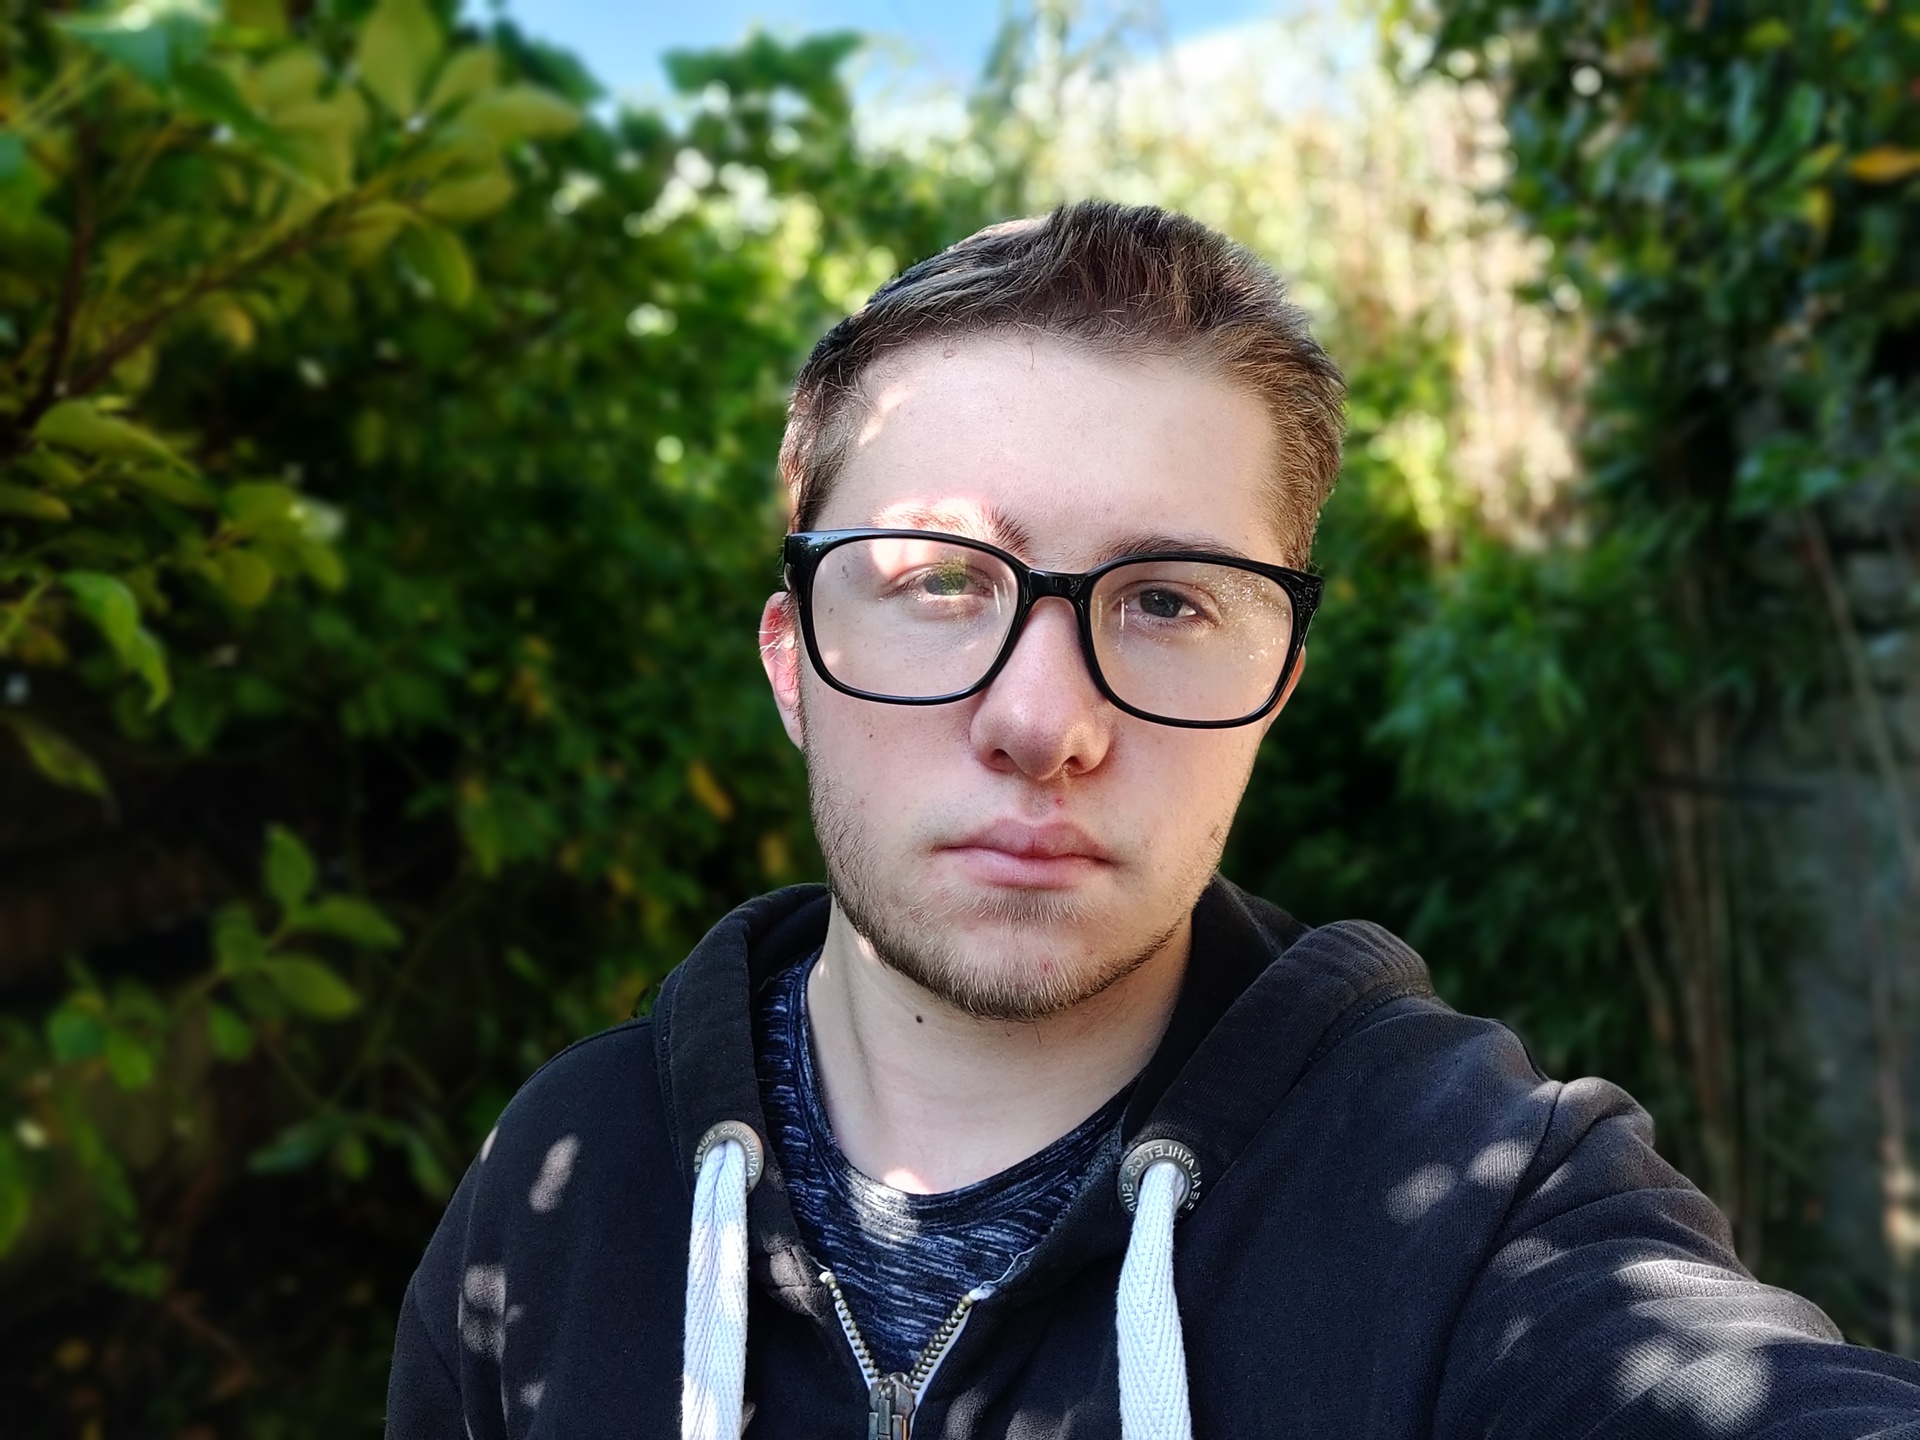 OnePlus 8T portrait camera sample outside in an HDR test